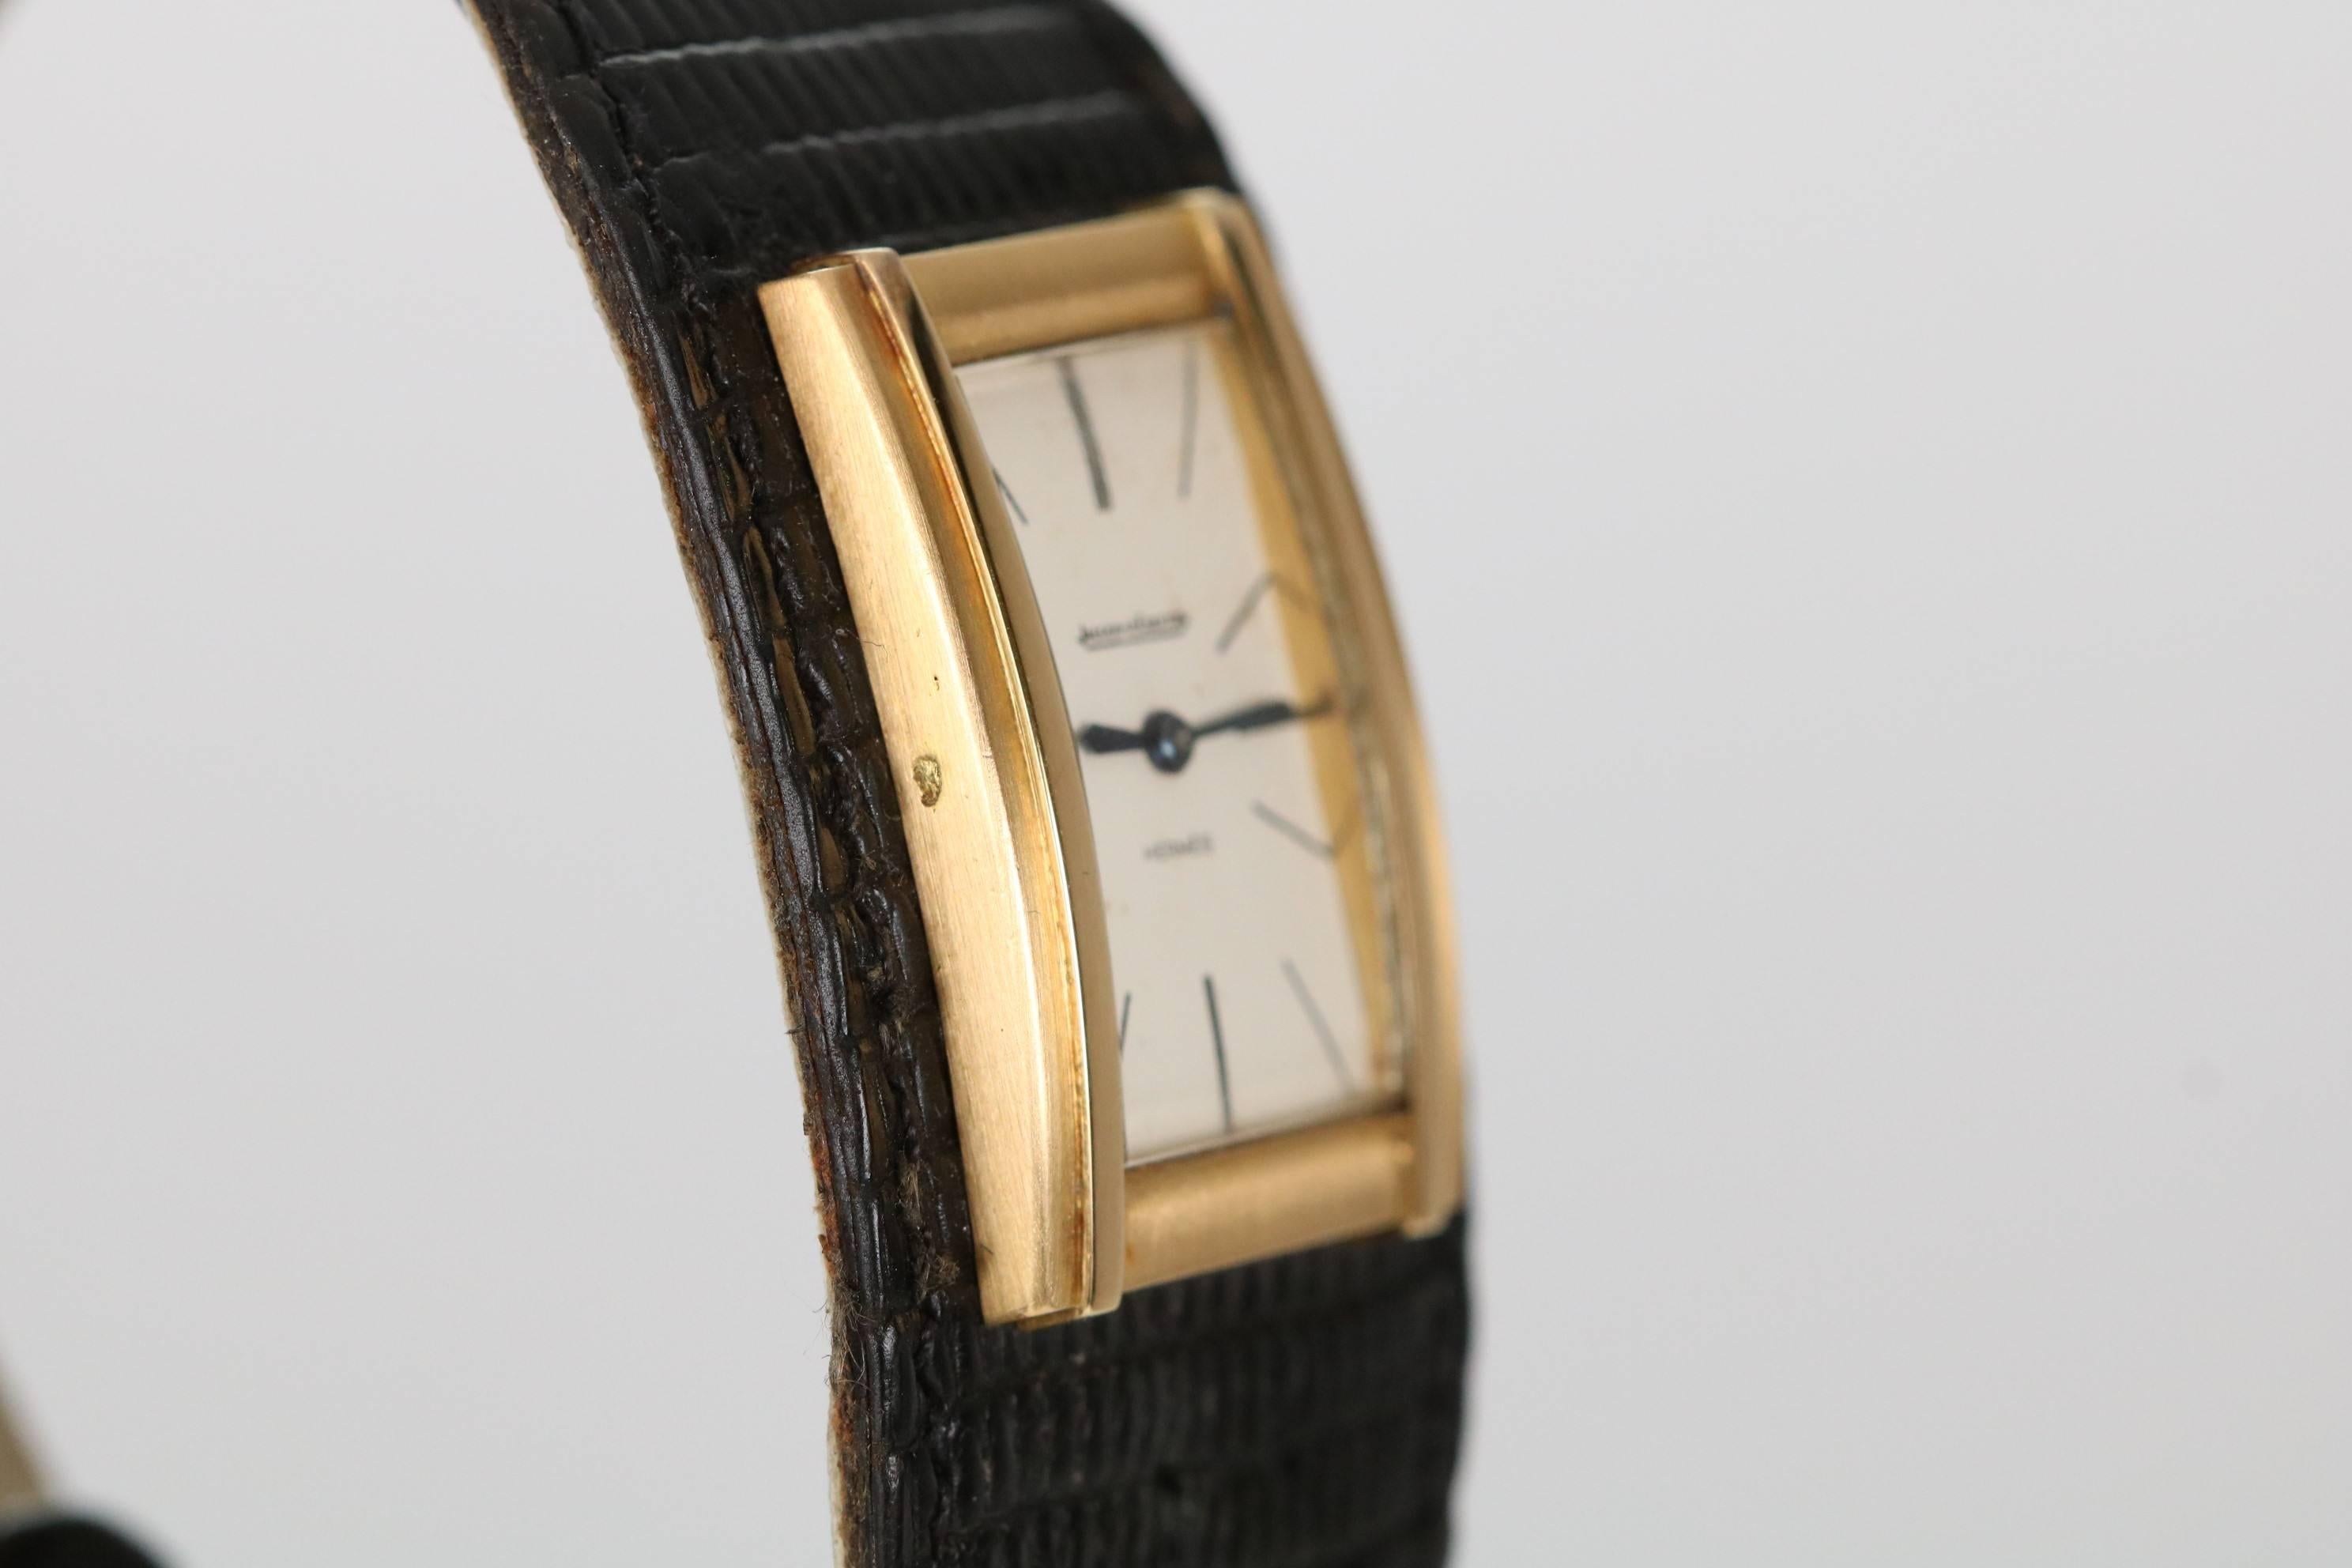 Jaeger LeCoultre for Hermes Yellow Gold Vintage Manual Wind Wristwatch 3